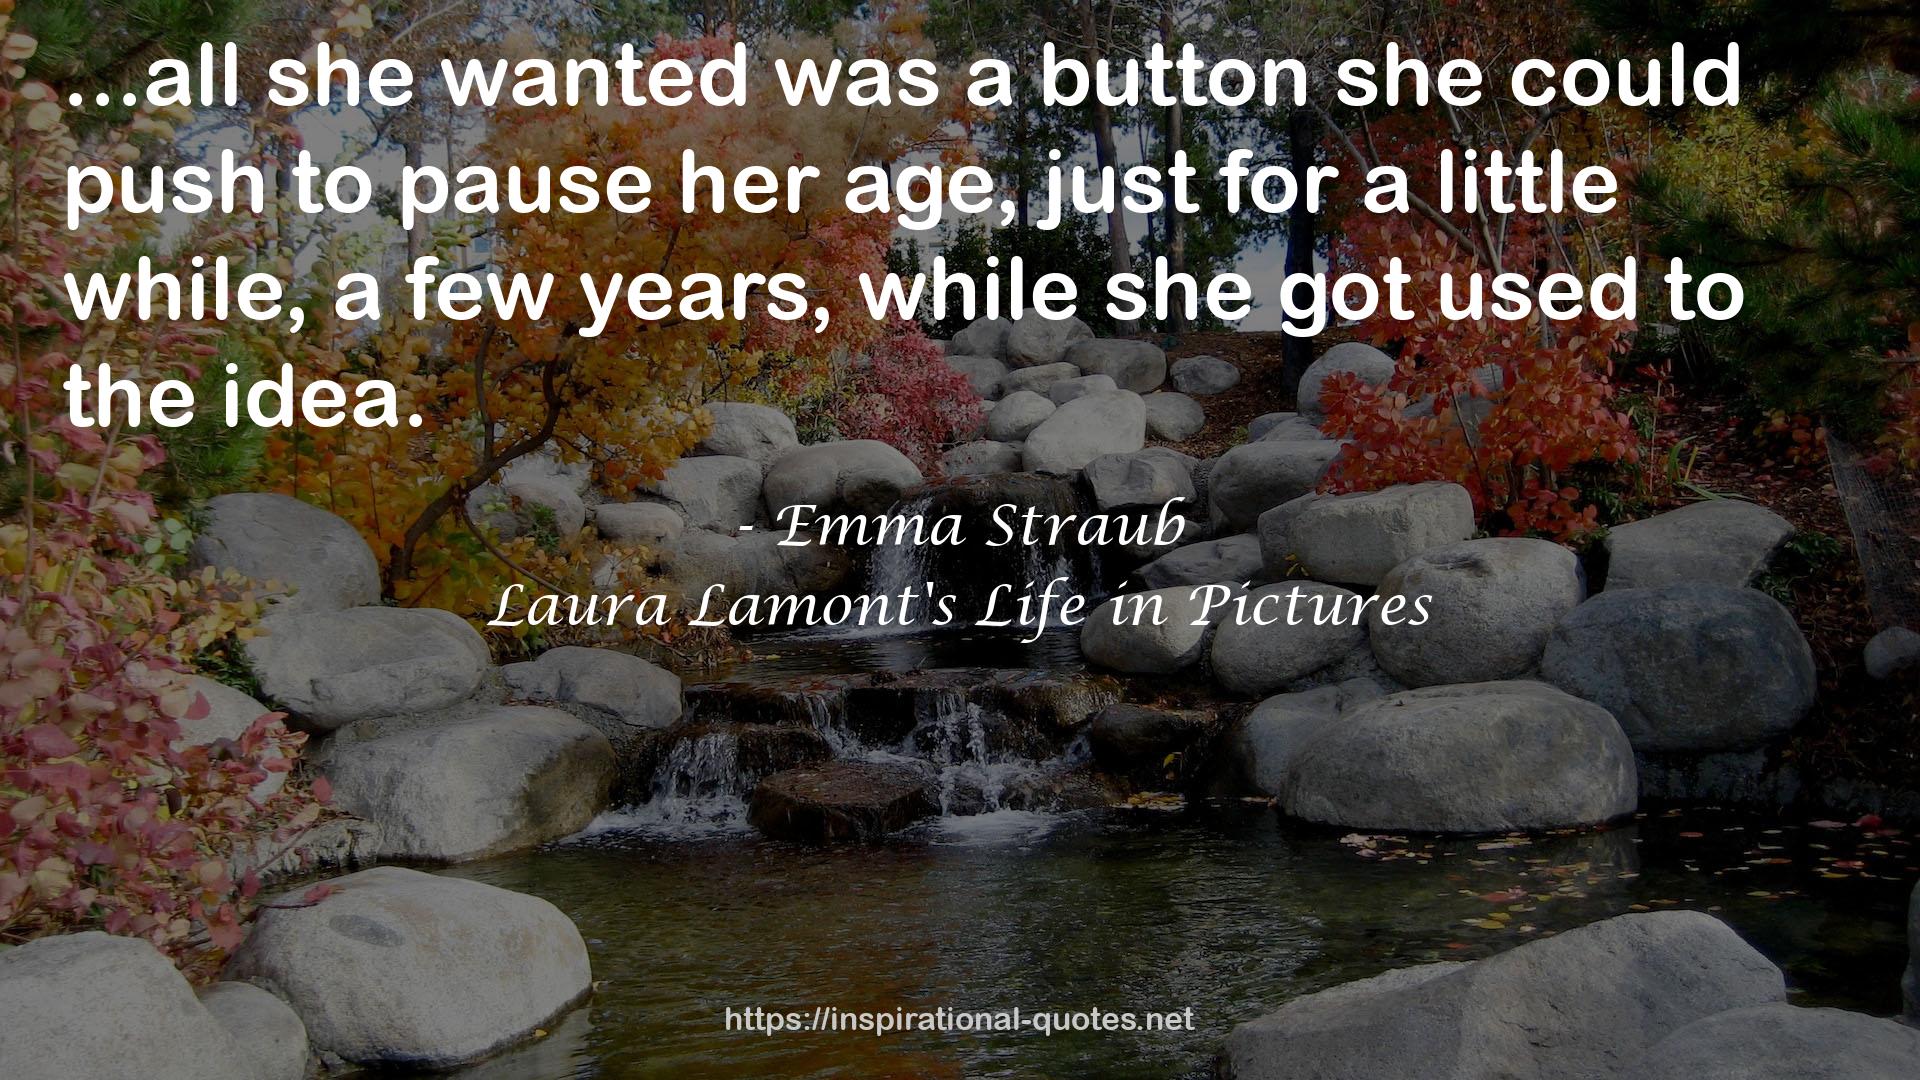 Laura Lamont's Life in Pictures QUOTES